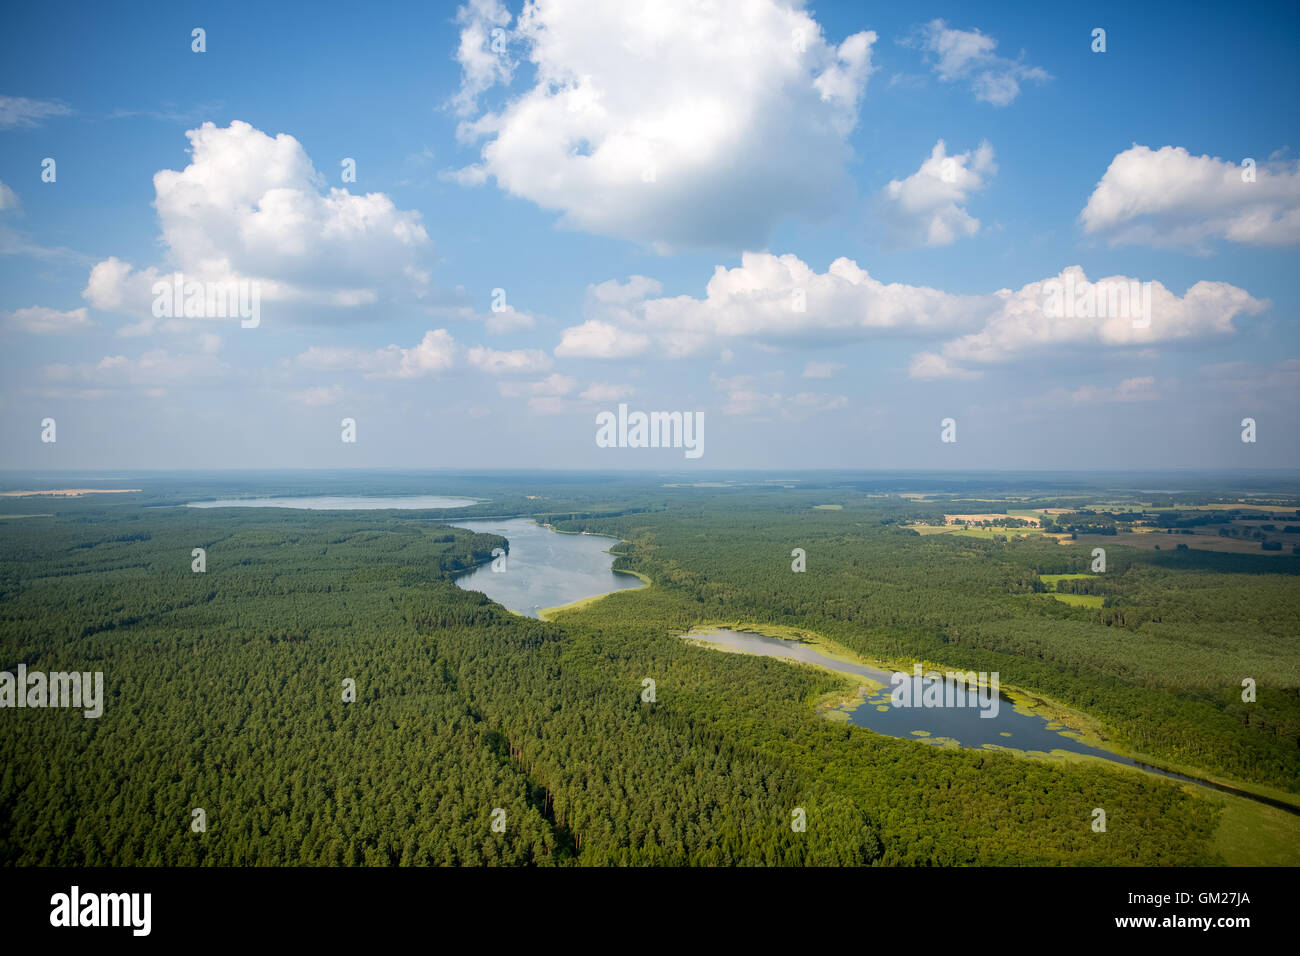 Aerial view, Moessel, Leppinsee, sea links, wooded area, nature reserve, Rechlin, Mecklenburg Seascape, Mecklenburg Switzerland, Stock Photo